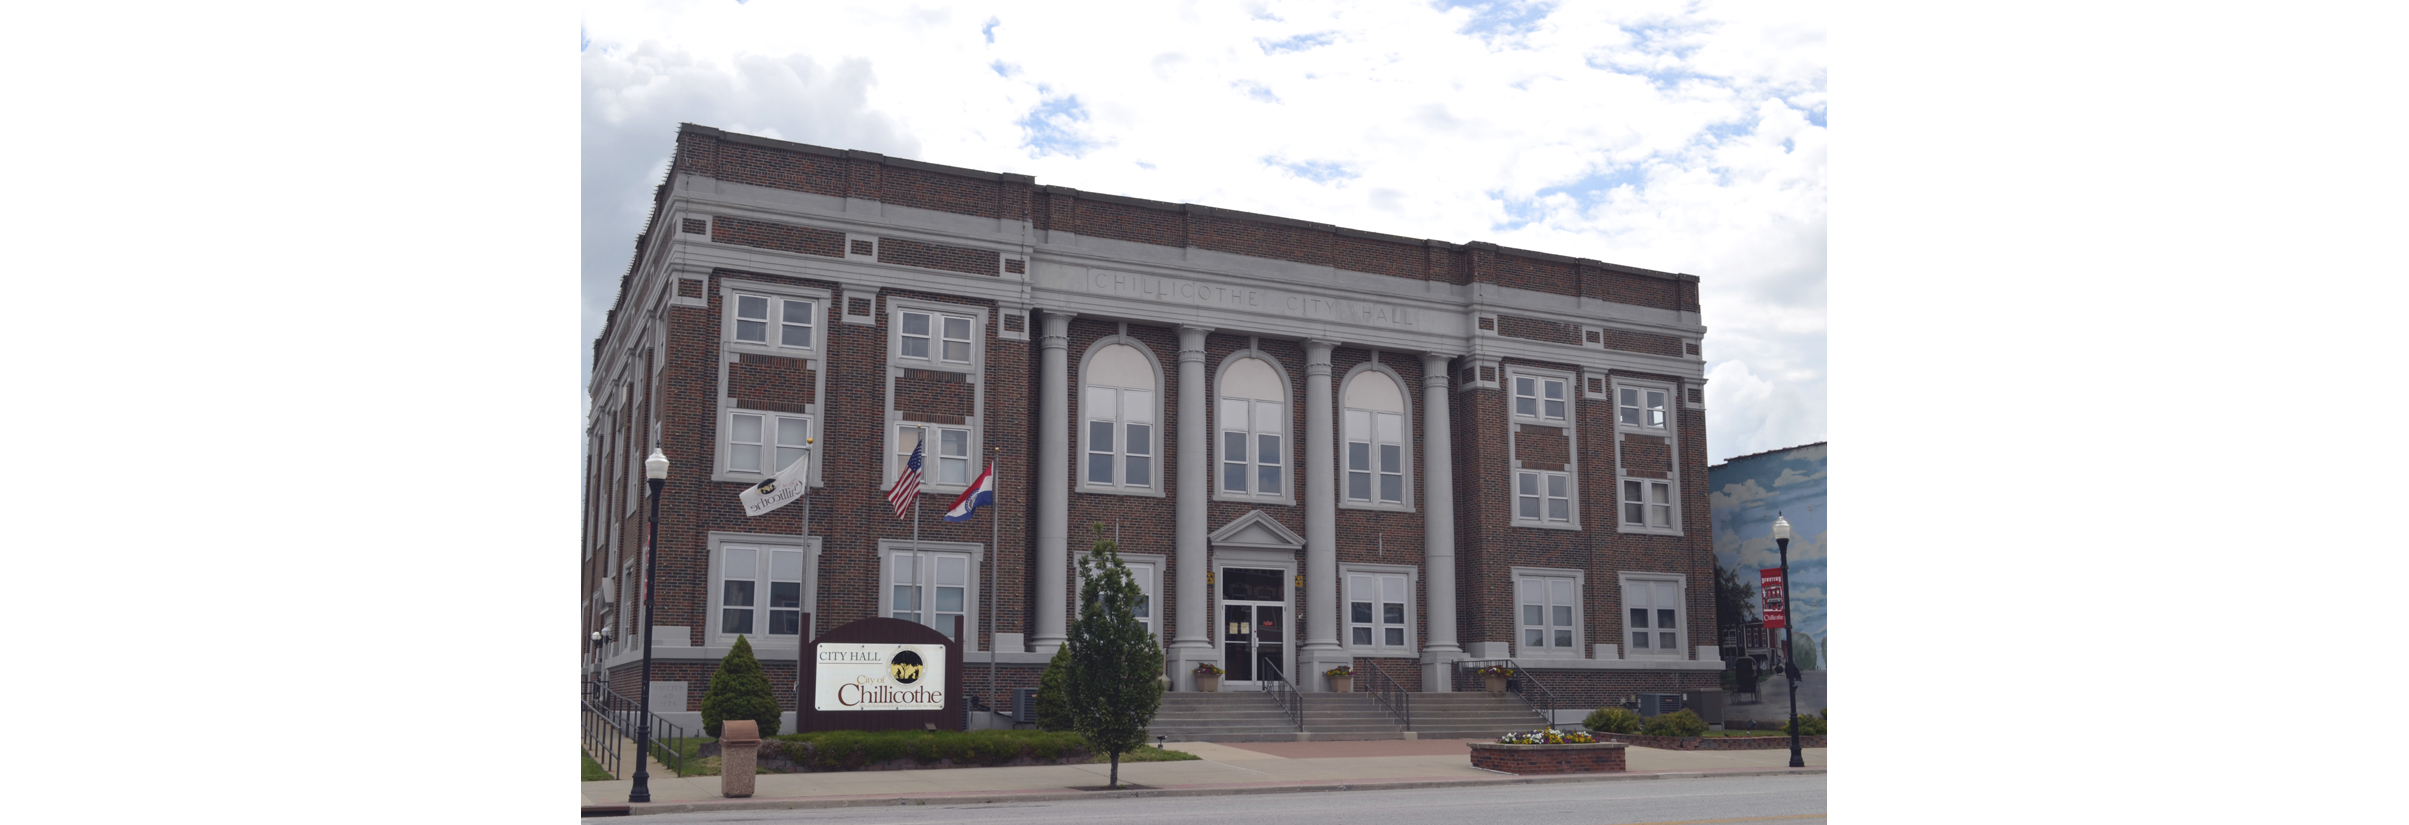 Chillicothe City Board Meetings And Public Hearing